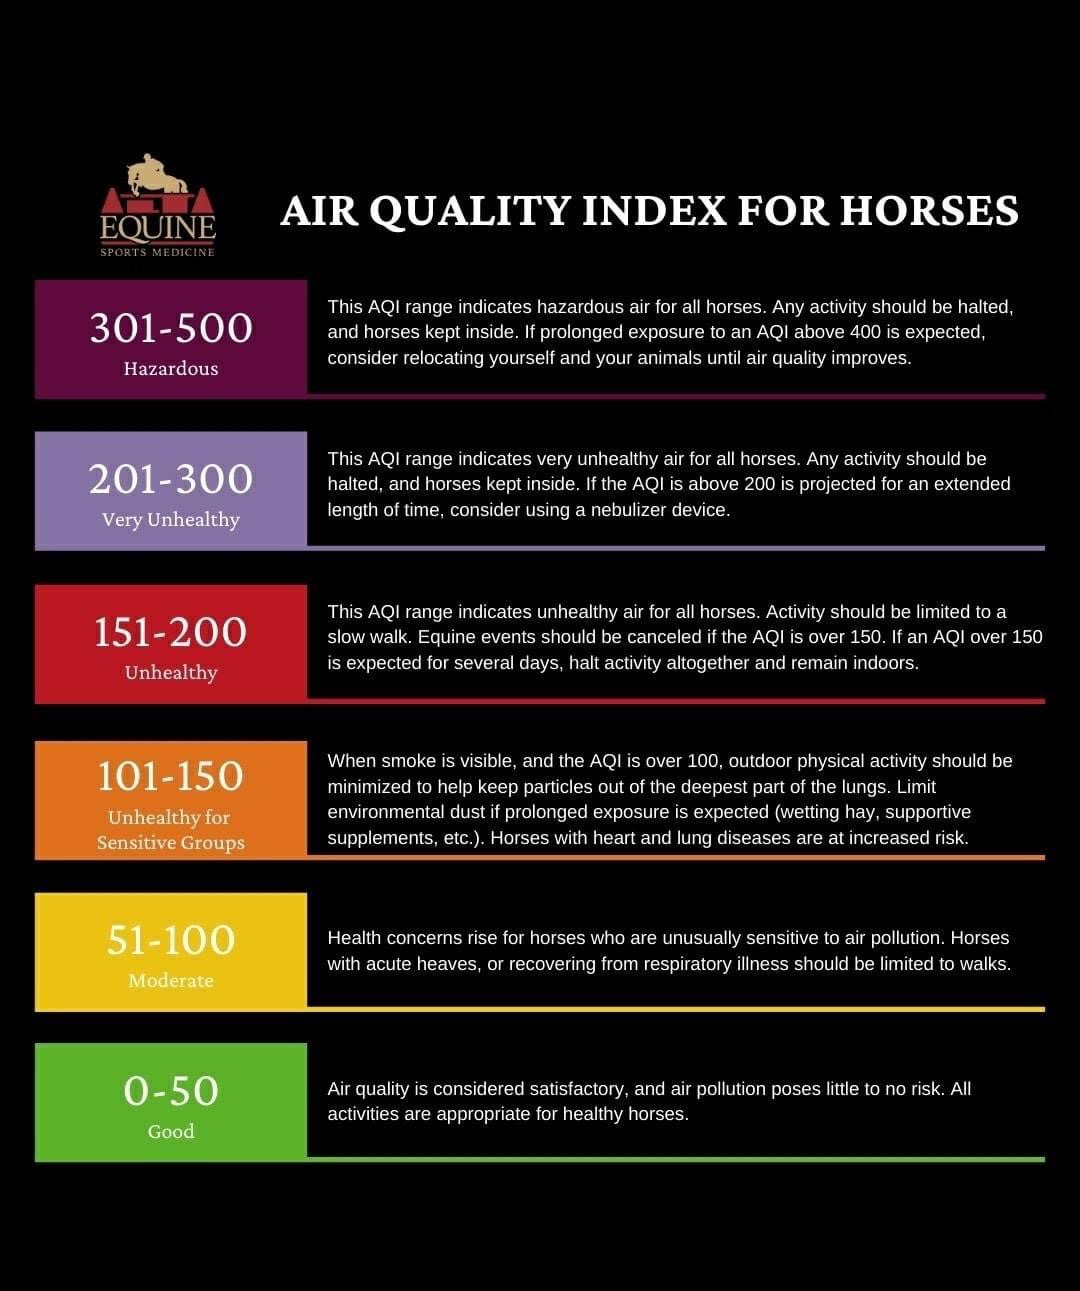 Air Quality Index for Horses